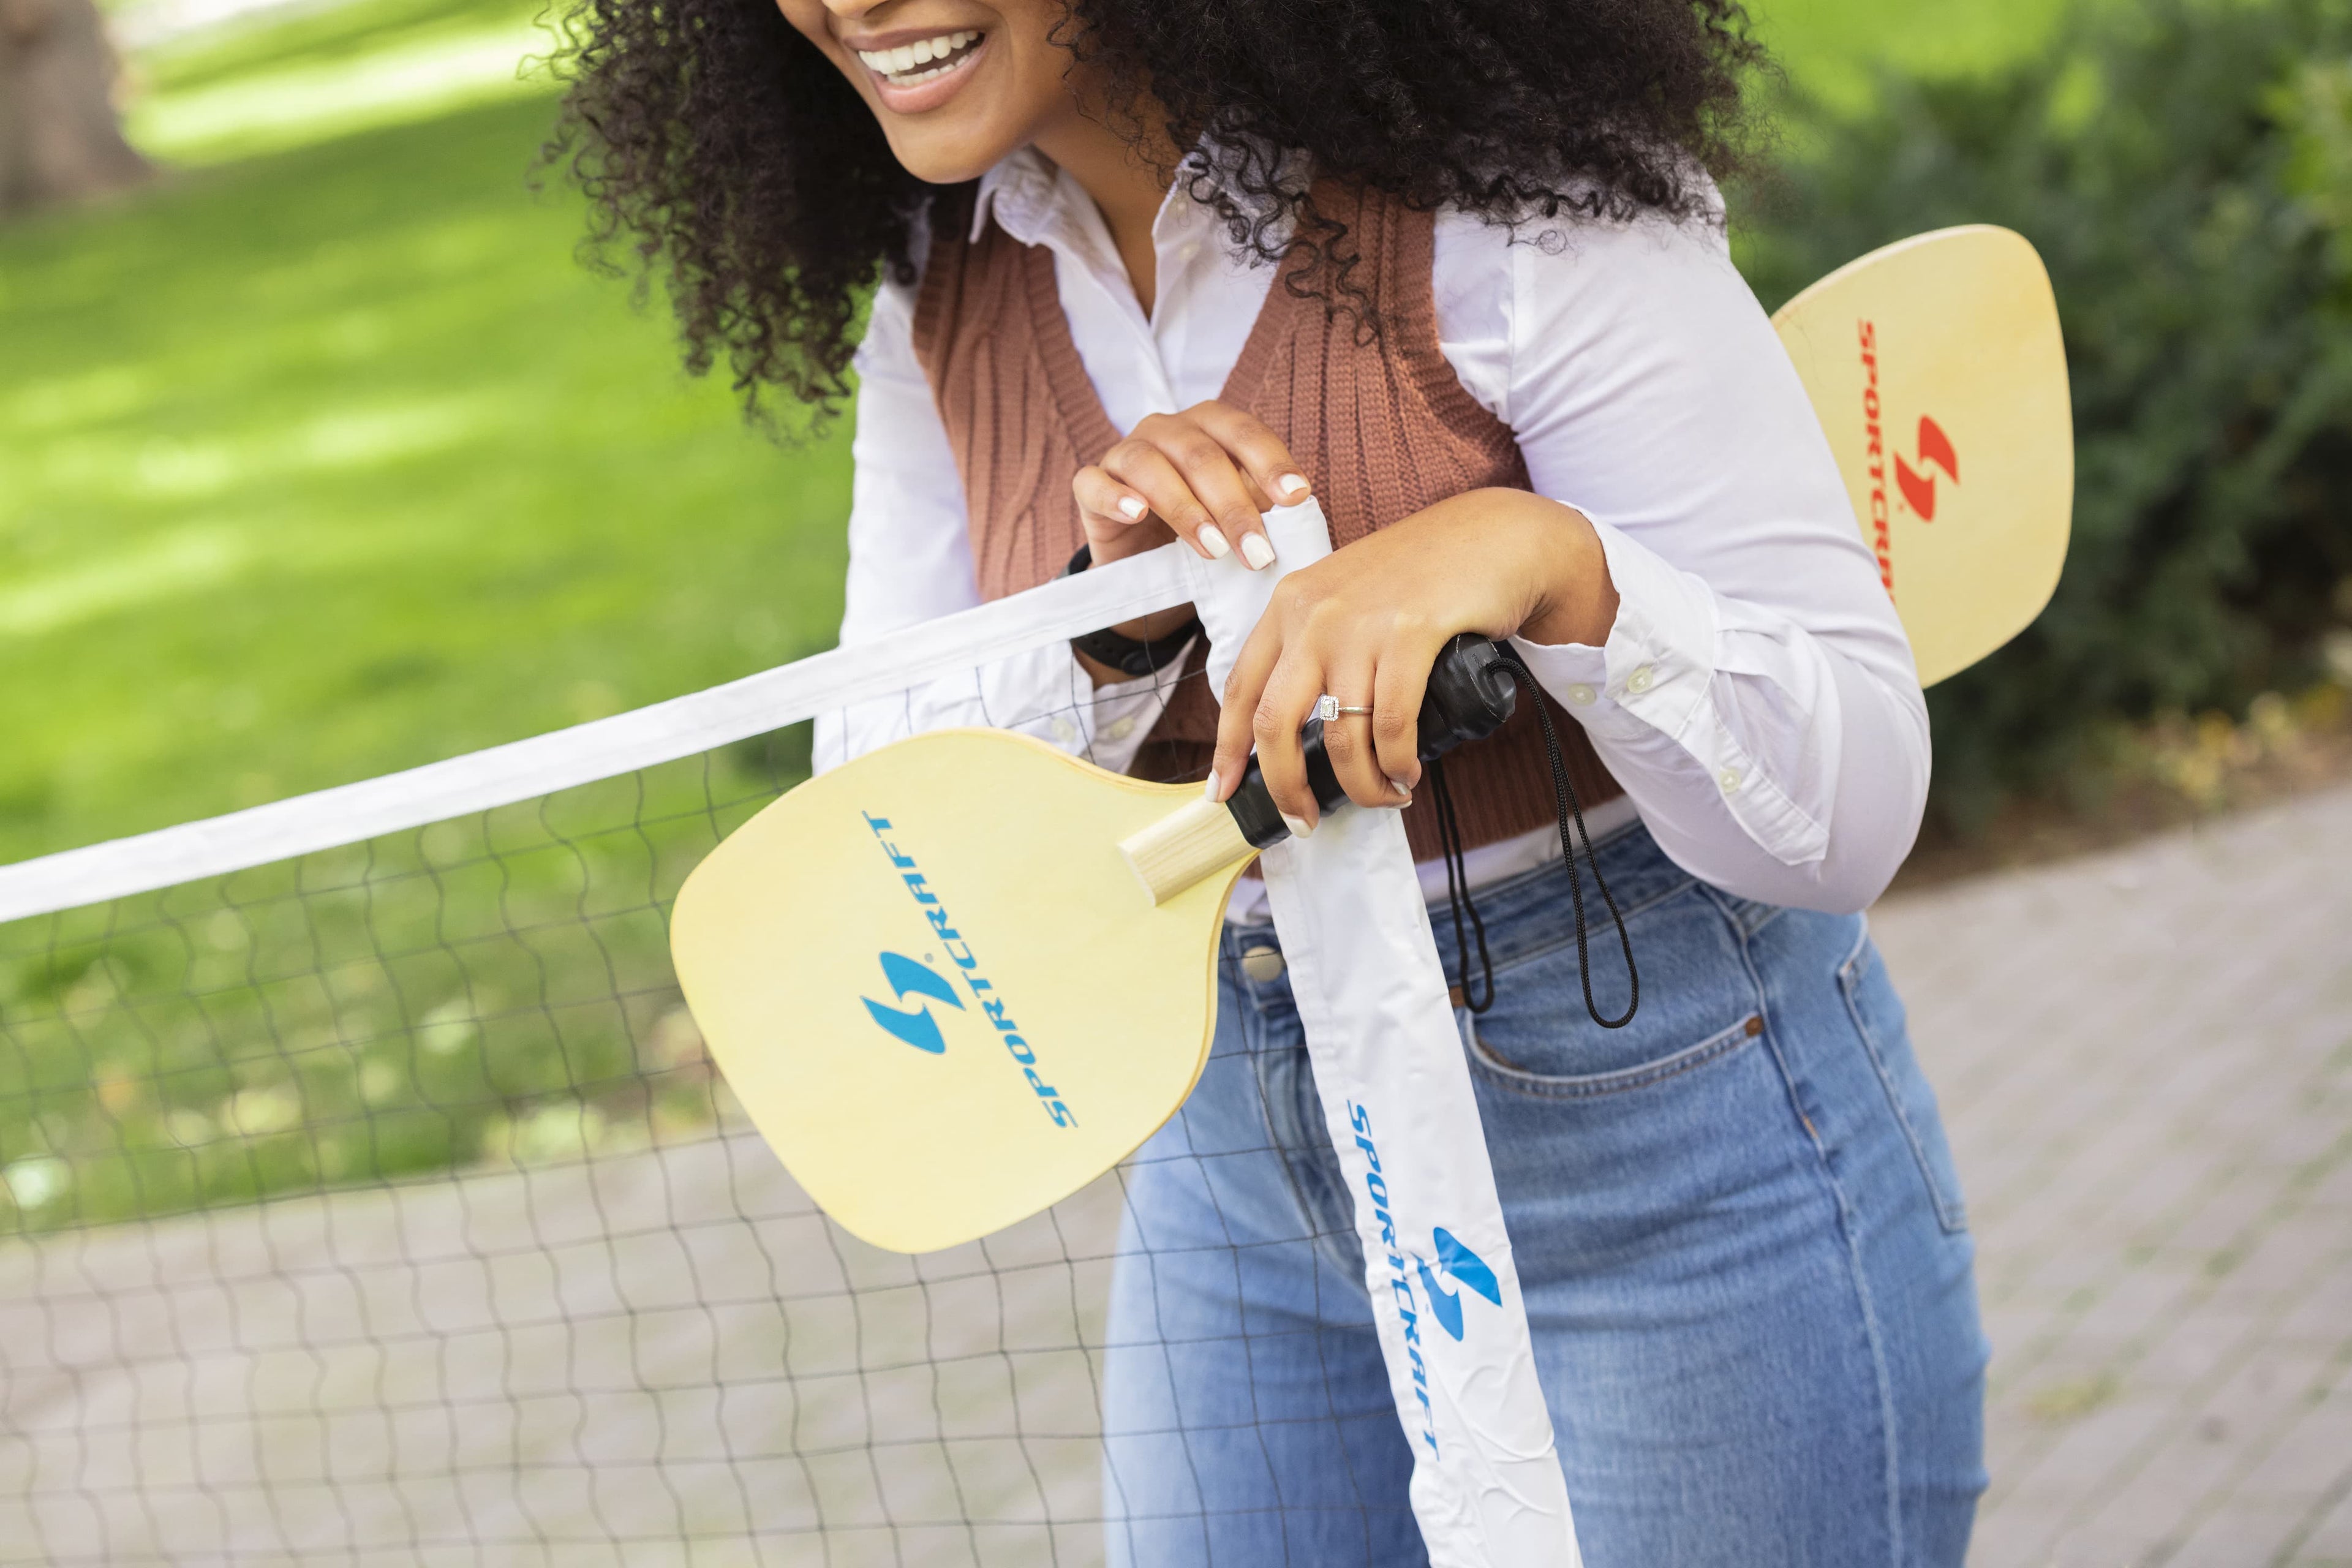 Sportcraft, Our products bring families and friends together. Women holding Pickleball paddles and standing next to a Pickleball net